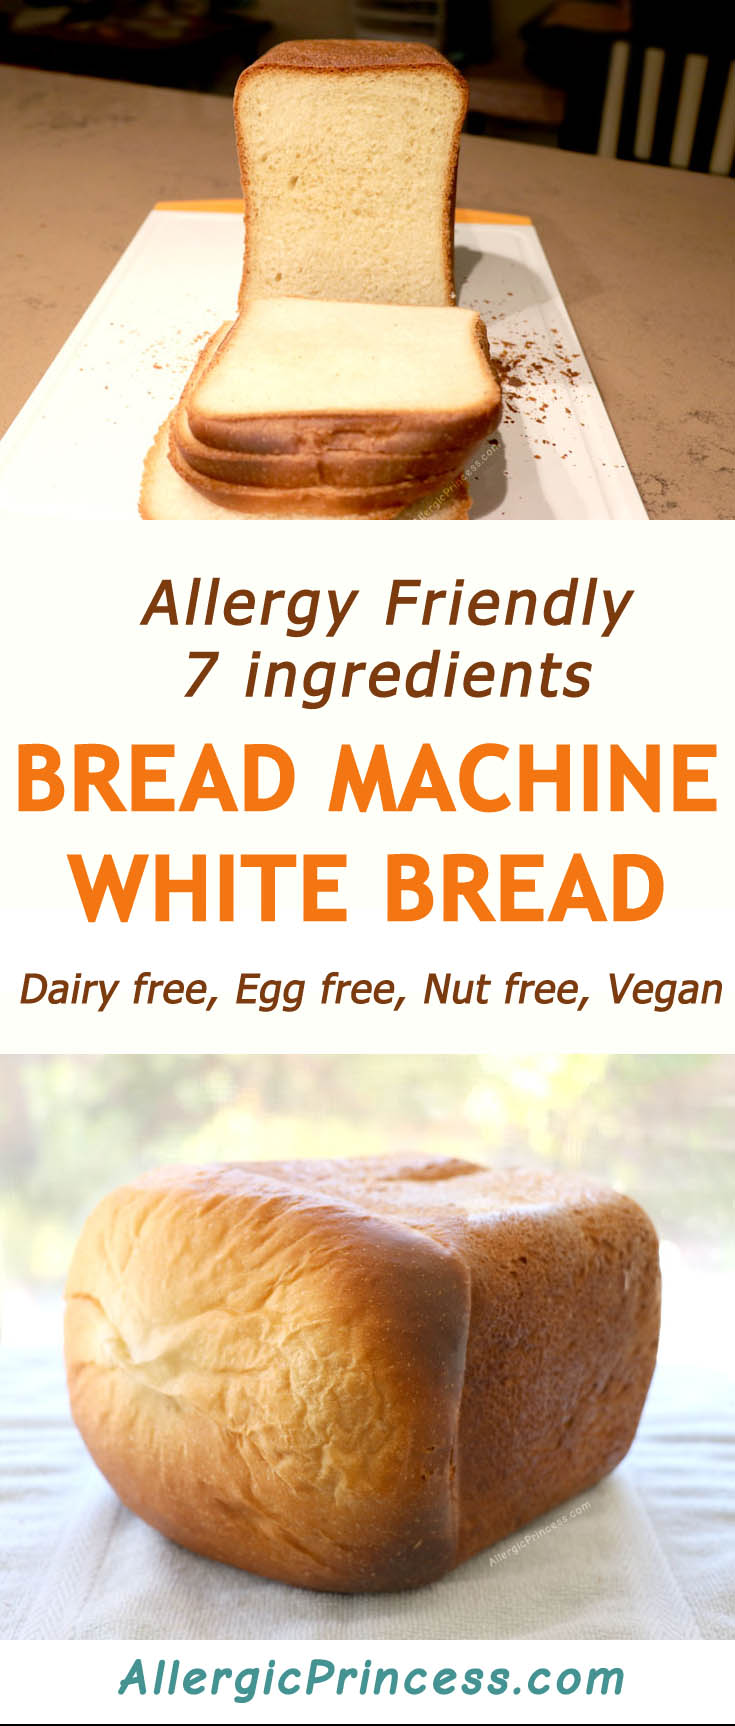 Classic dairy free bread machine white bread is easy to make by just adding 7 ingredients into the bread machine and switching it on. EGG FREE, DAIRY FREE, NUT FREE, VEGAN